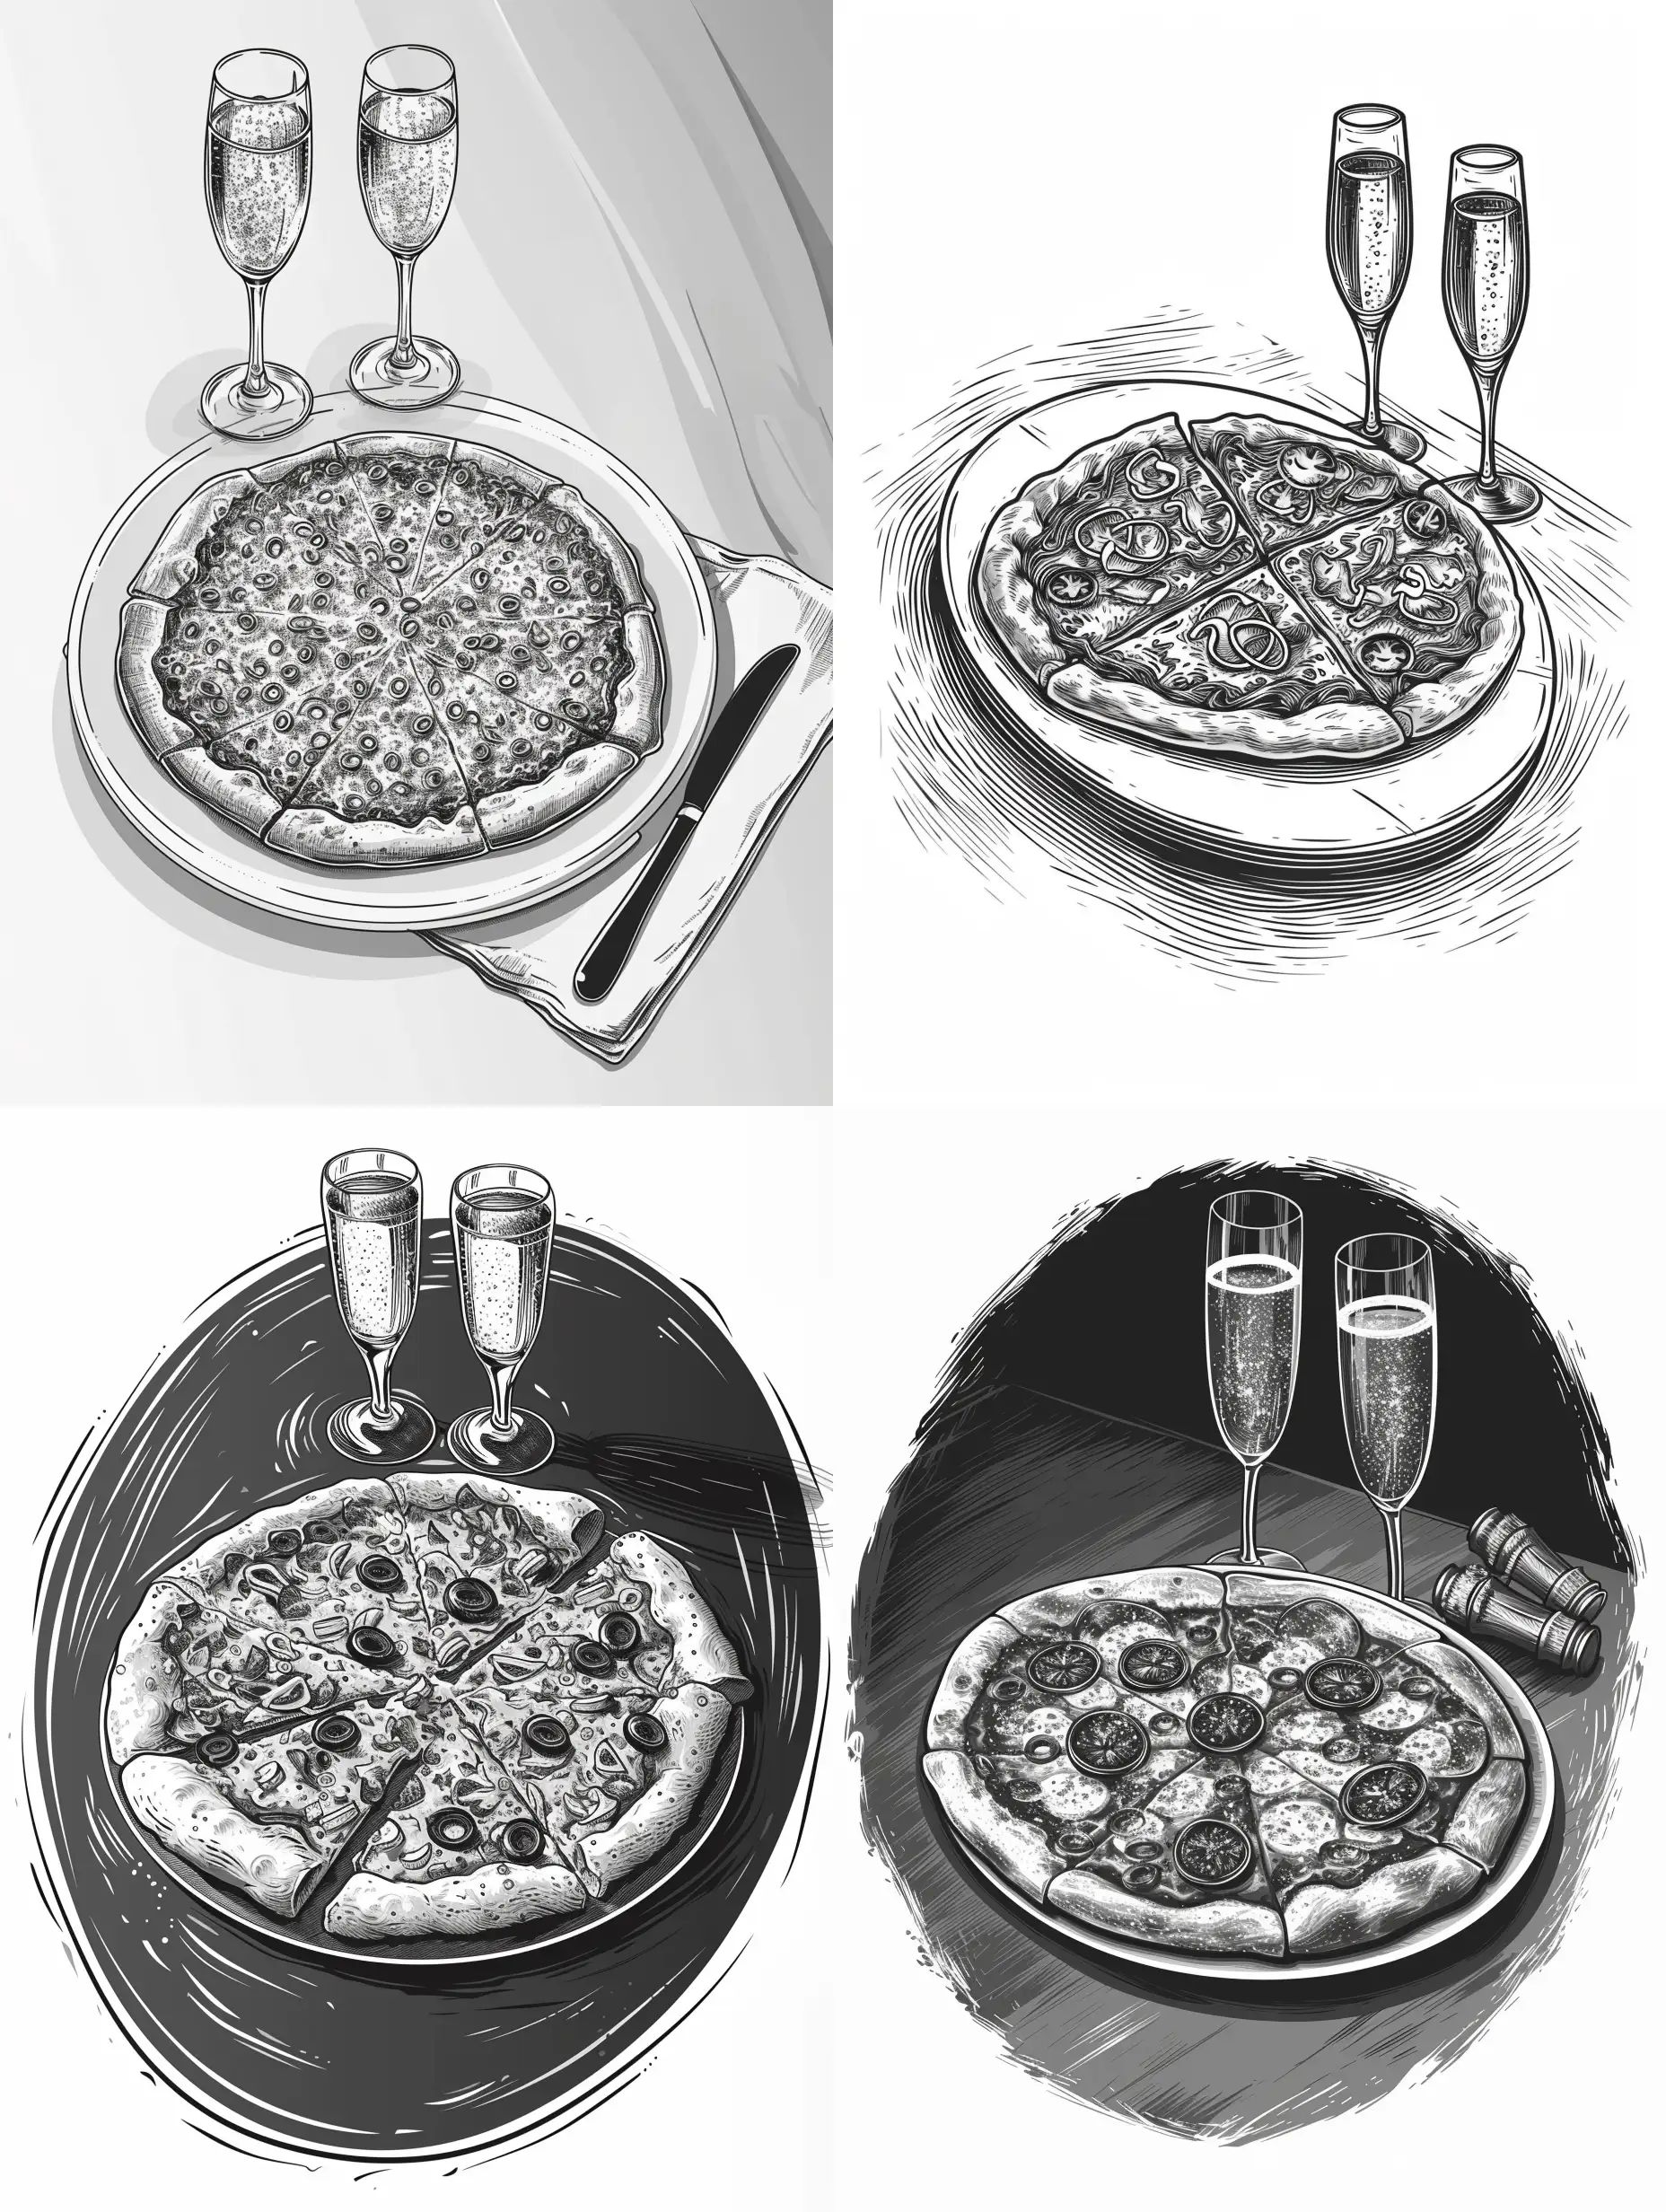 Minimalist-Vector-Illustration-of-Pizza-and-Champagne-Glasses-on-Table